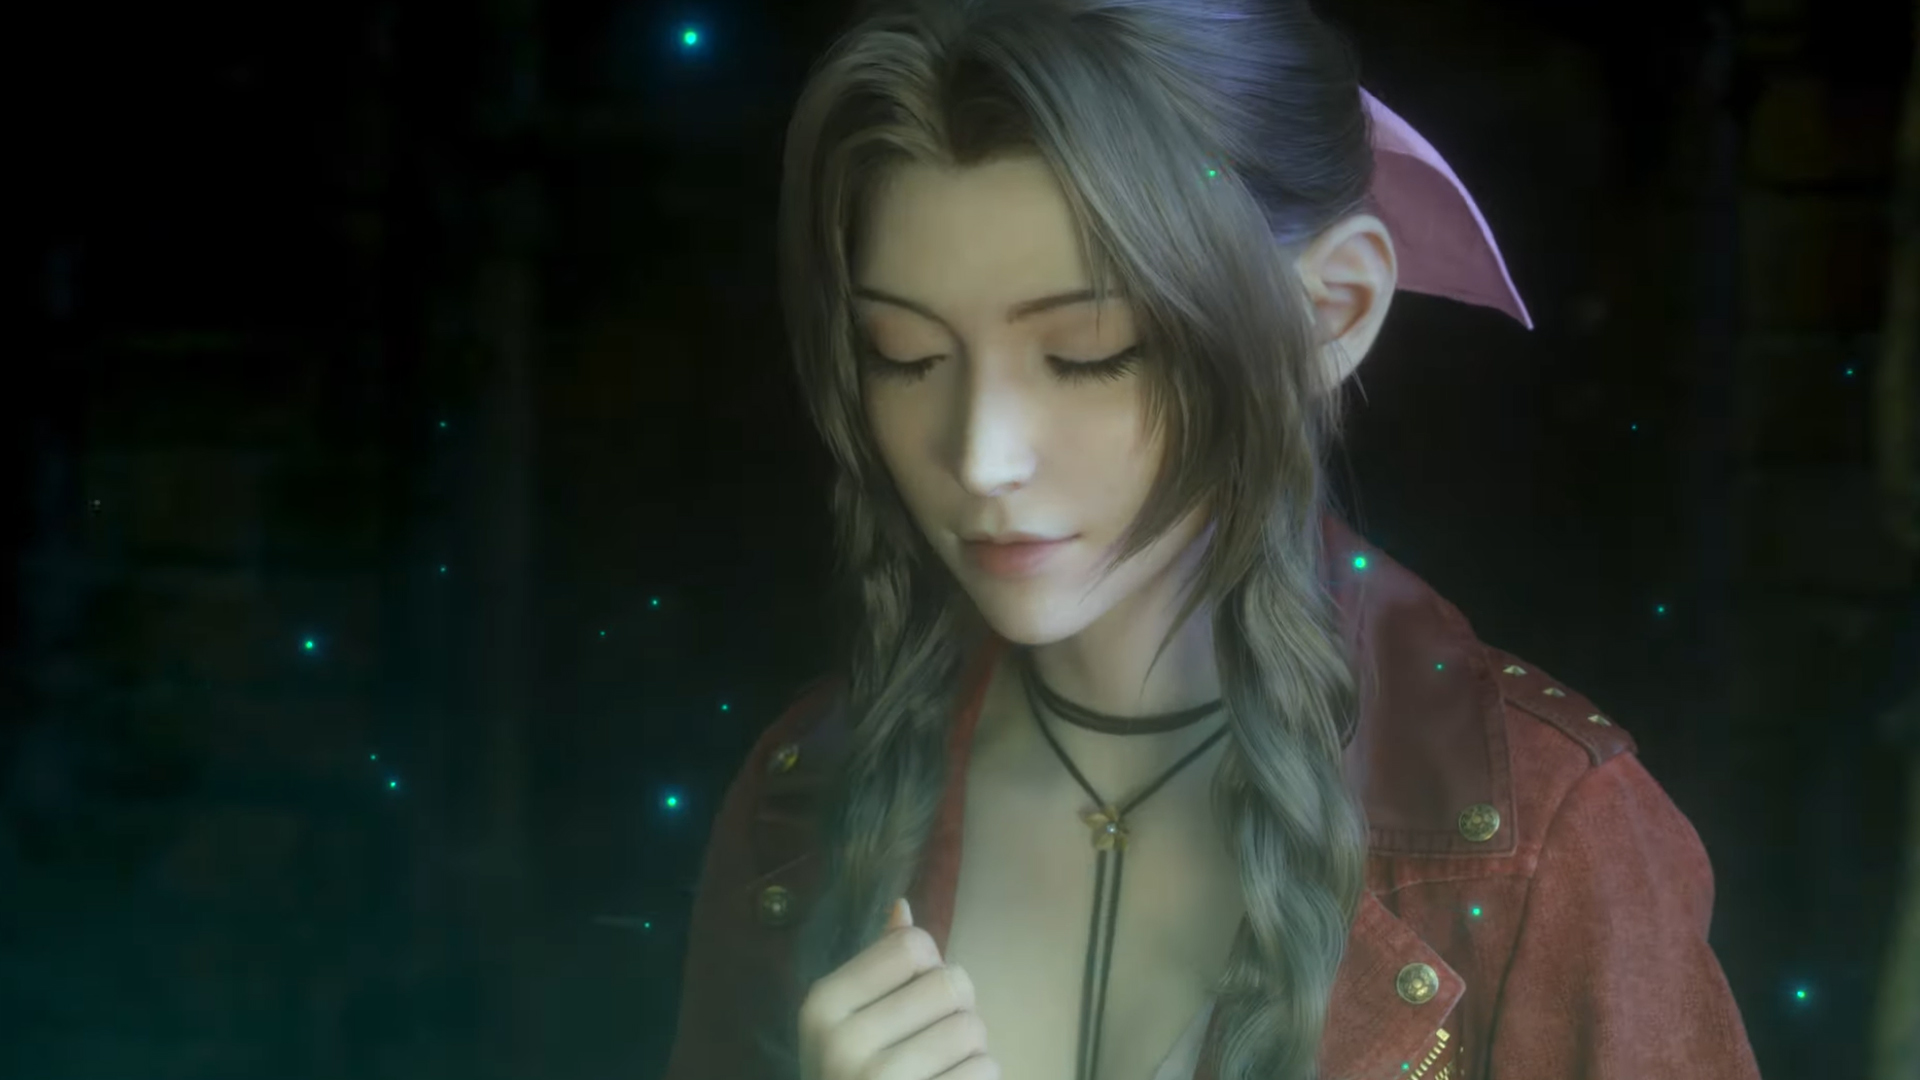 A new Final Fantasy 7 Remake trailer shows Aerith, Sephiroth, and action combat